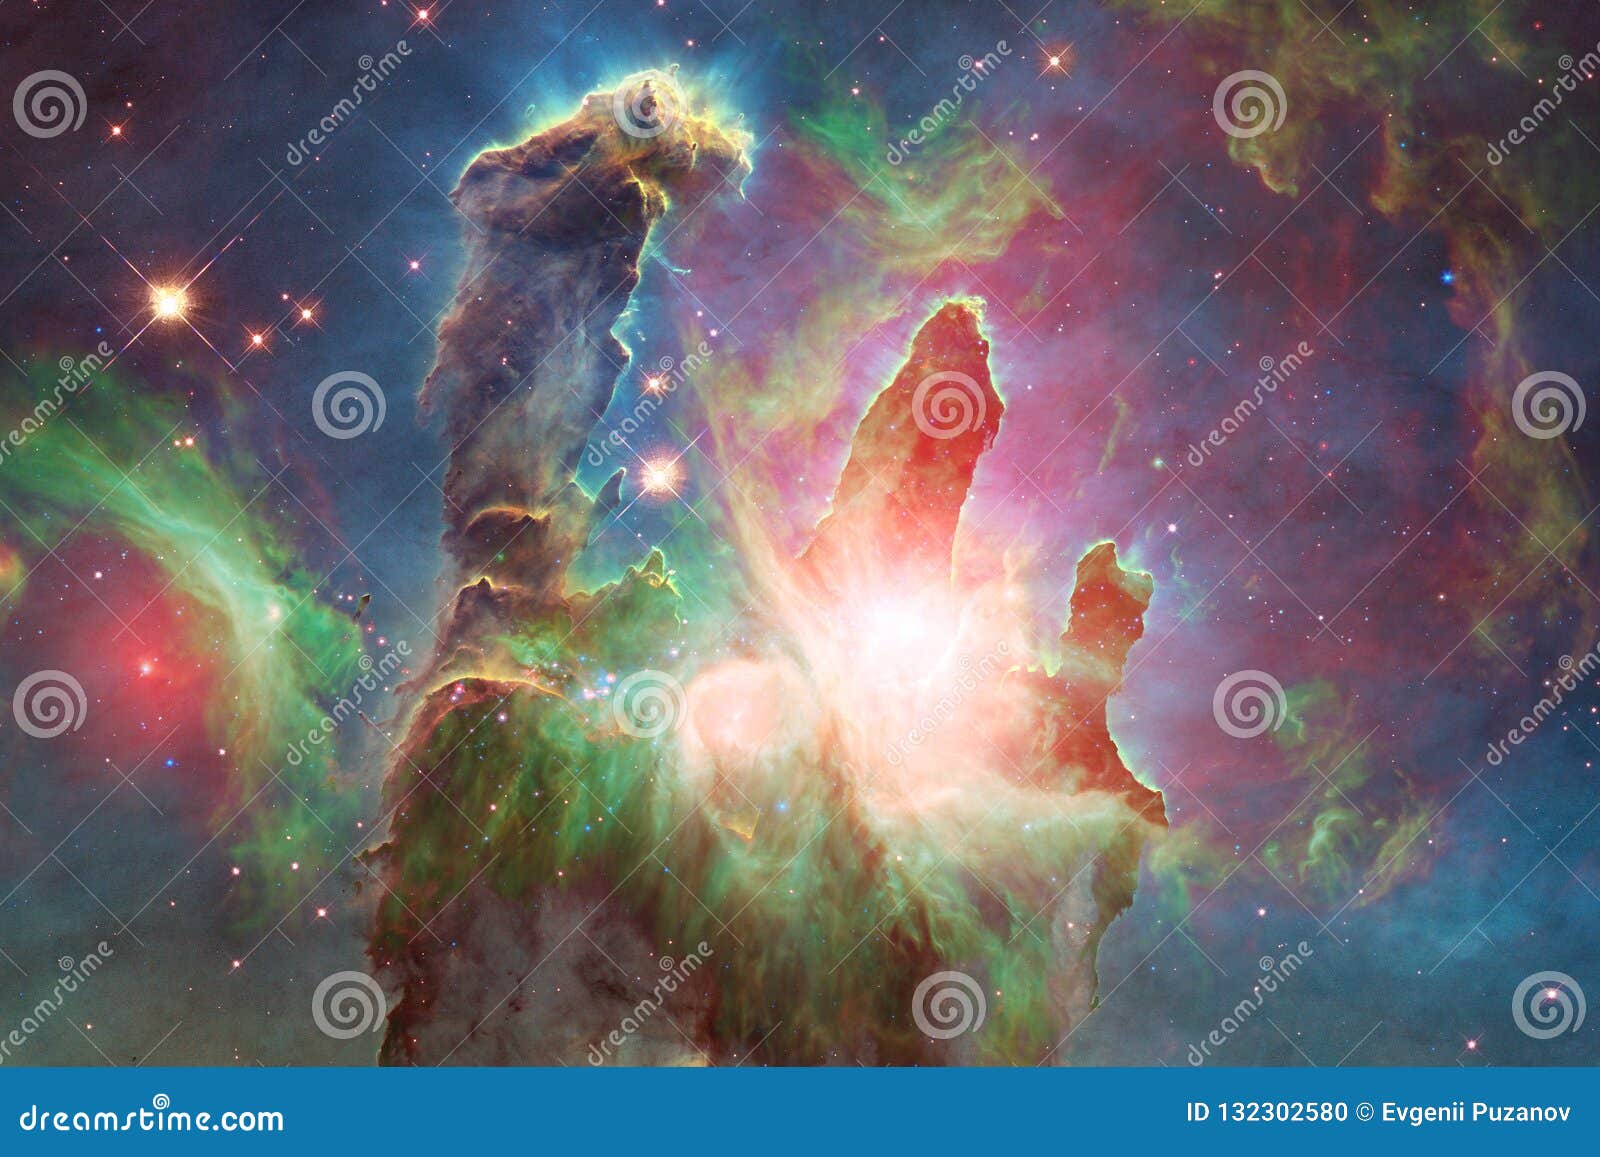 Nebulae and Stars in Deep Space. Cosmic Art, Science Fiction Wallpaper